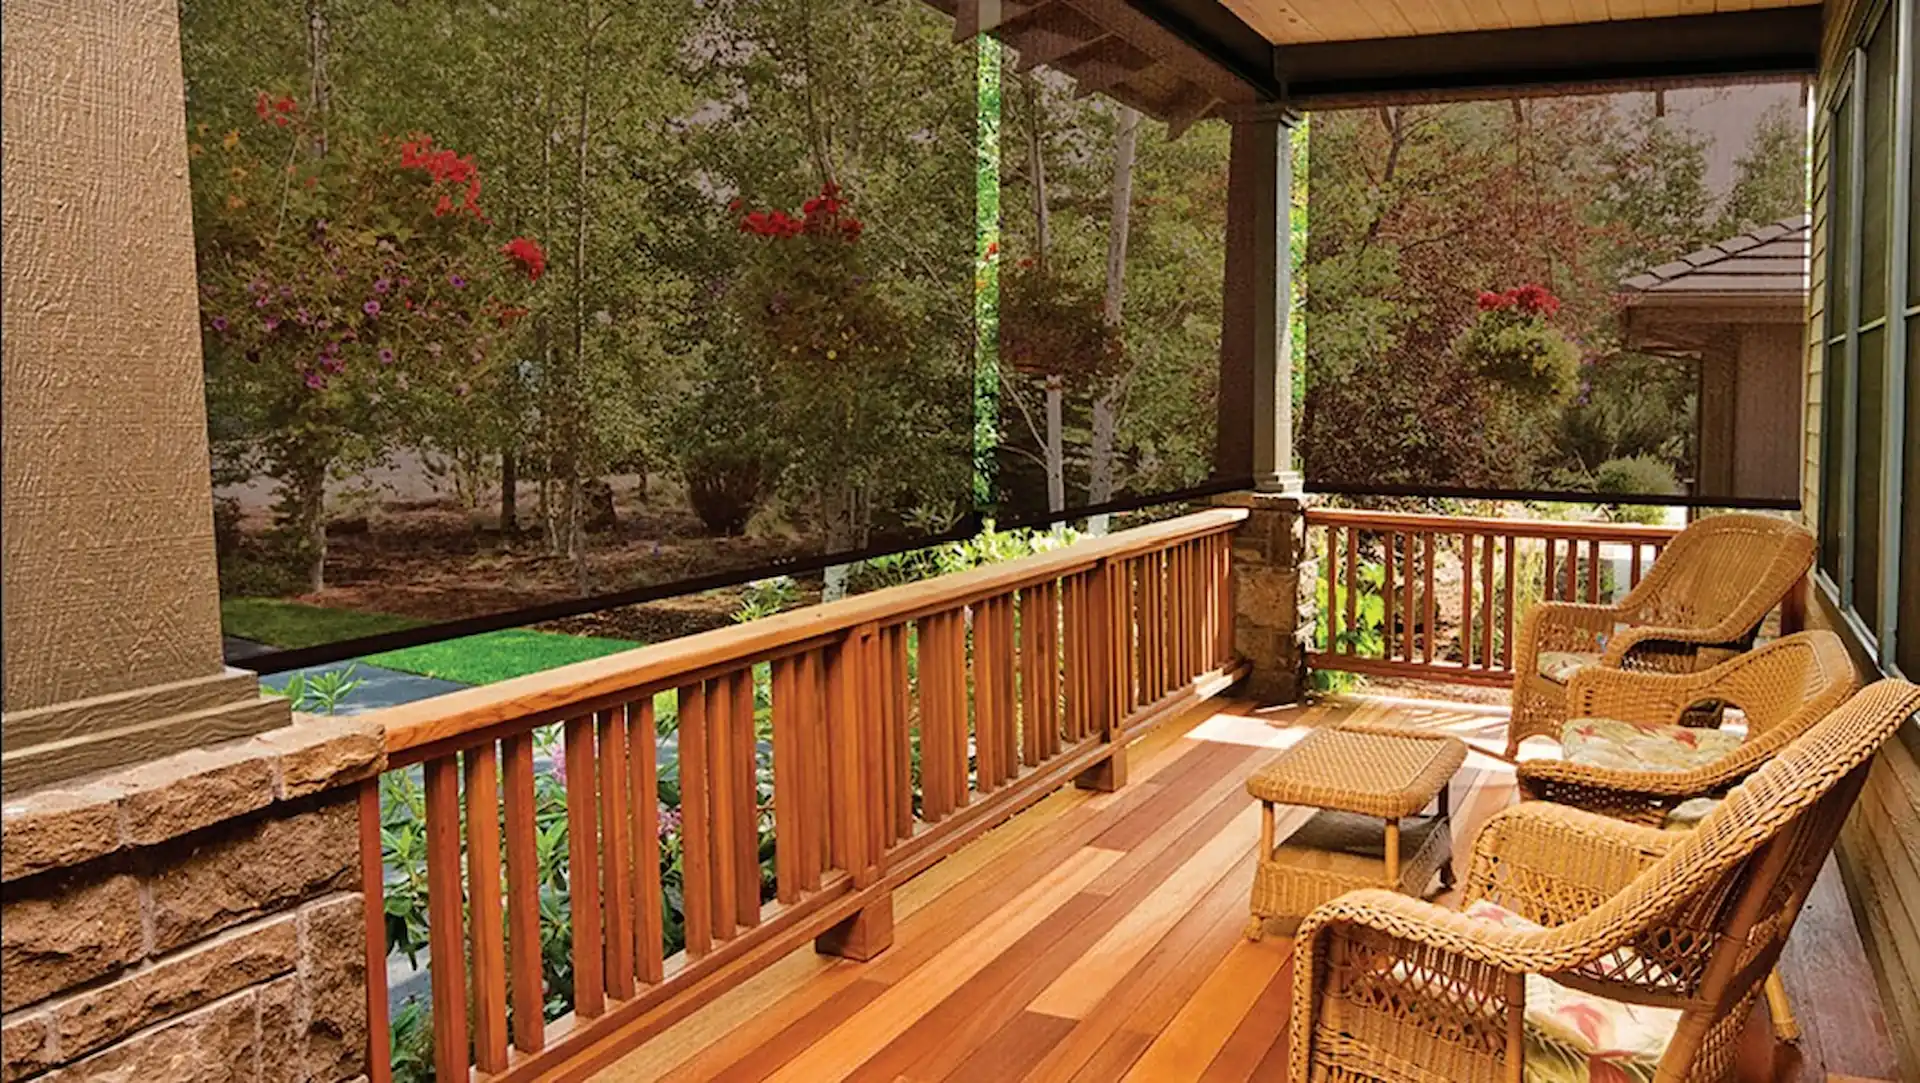 Exterior shot of a porch with wooden floors and railings. Non-zip shade screens are hanging from the porch roof to help shield the porch area from sun glare.